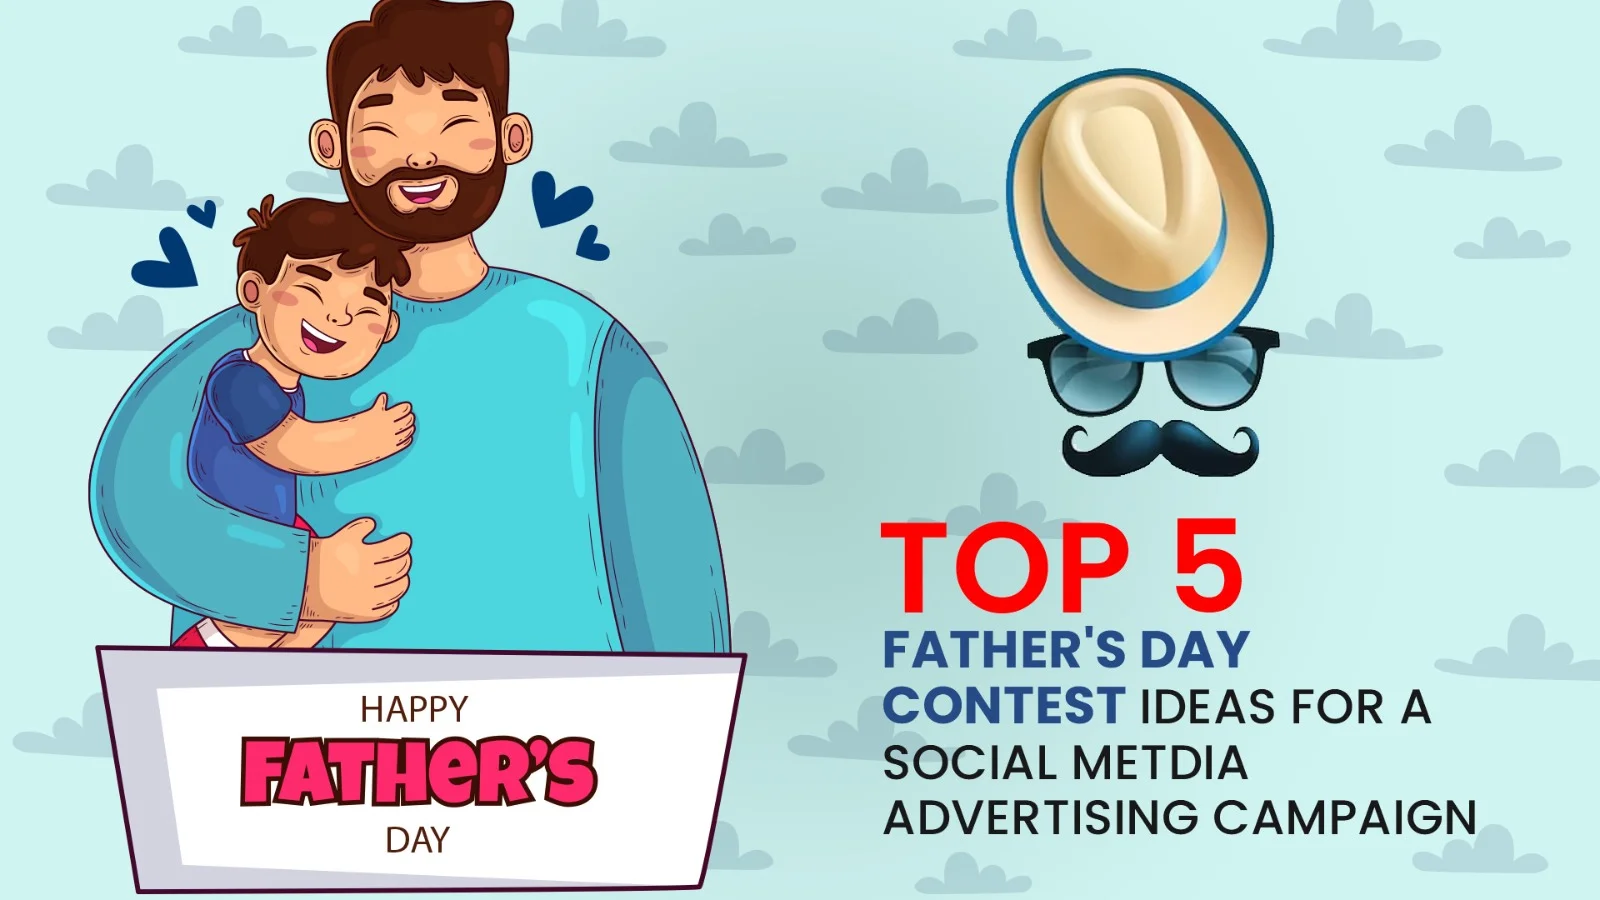 Top 5 Father’s Day contest ideas for a social media advertising campaign